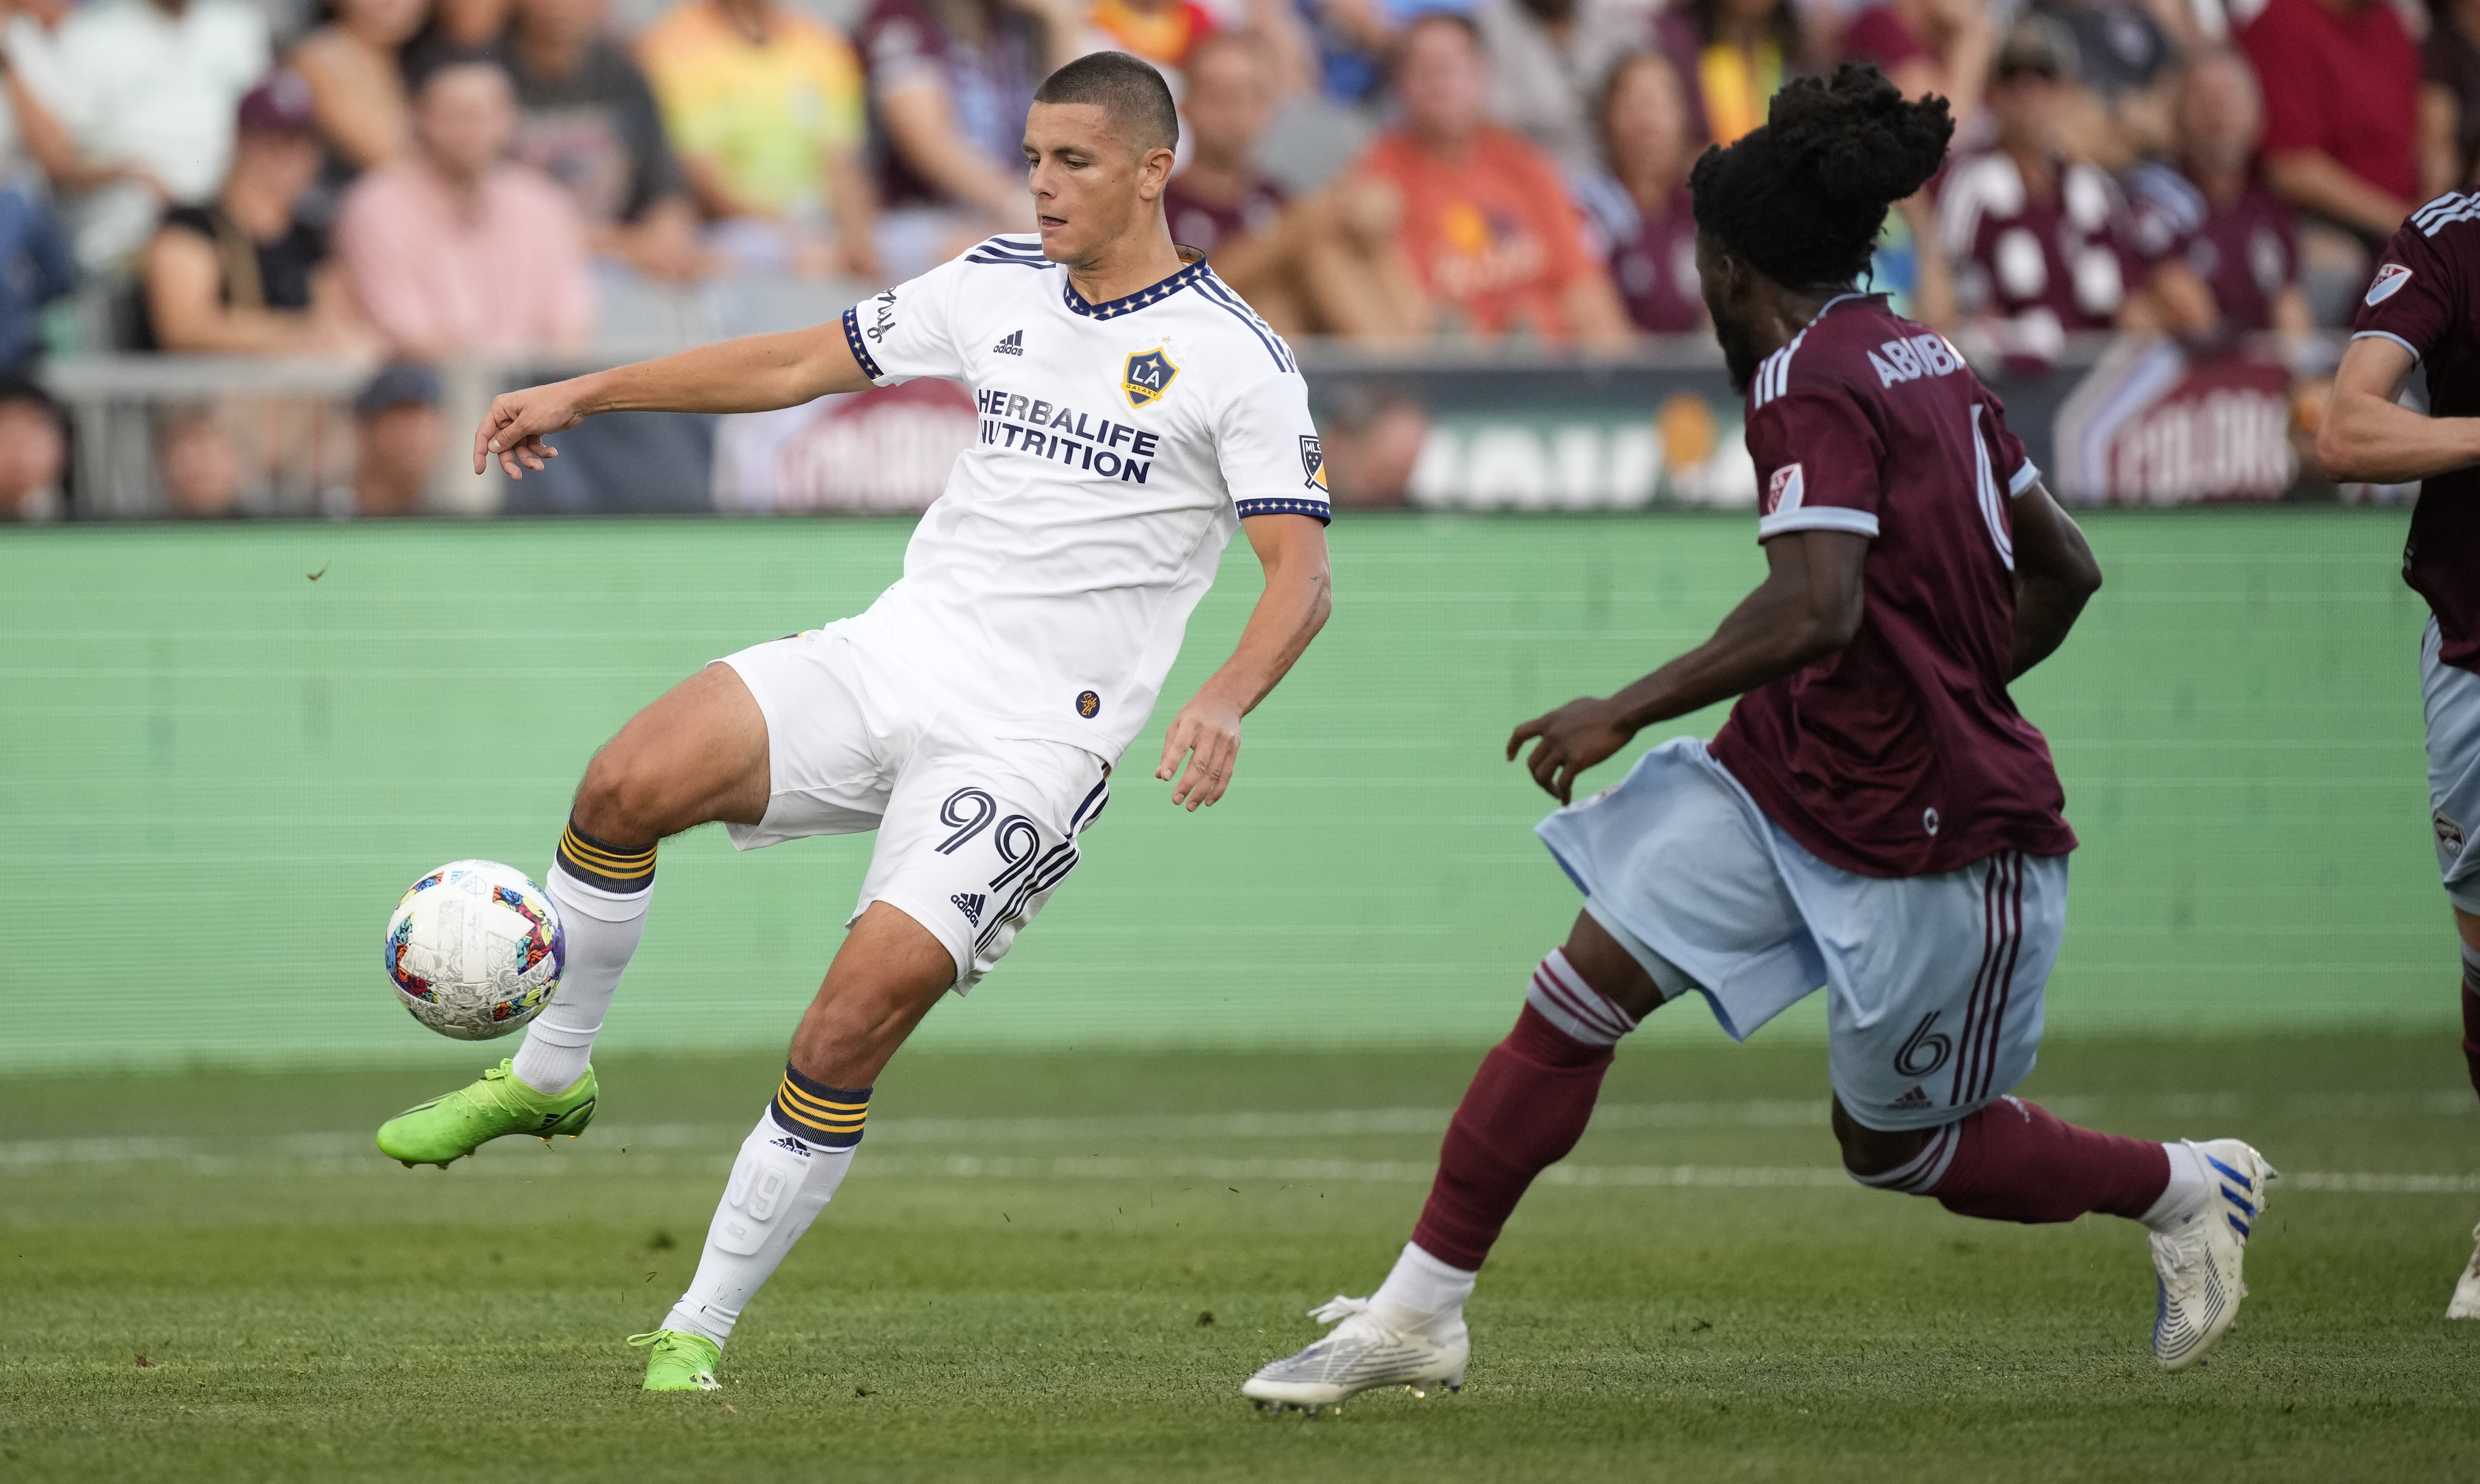 WATCH: LA Galaxy stay in playoff picture with win over Atlanta United